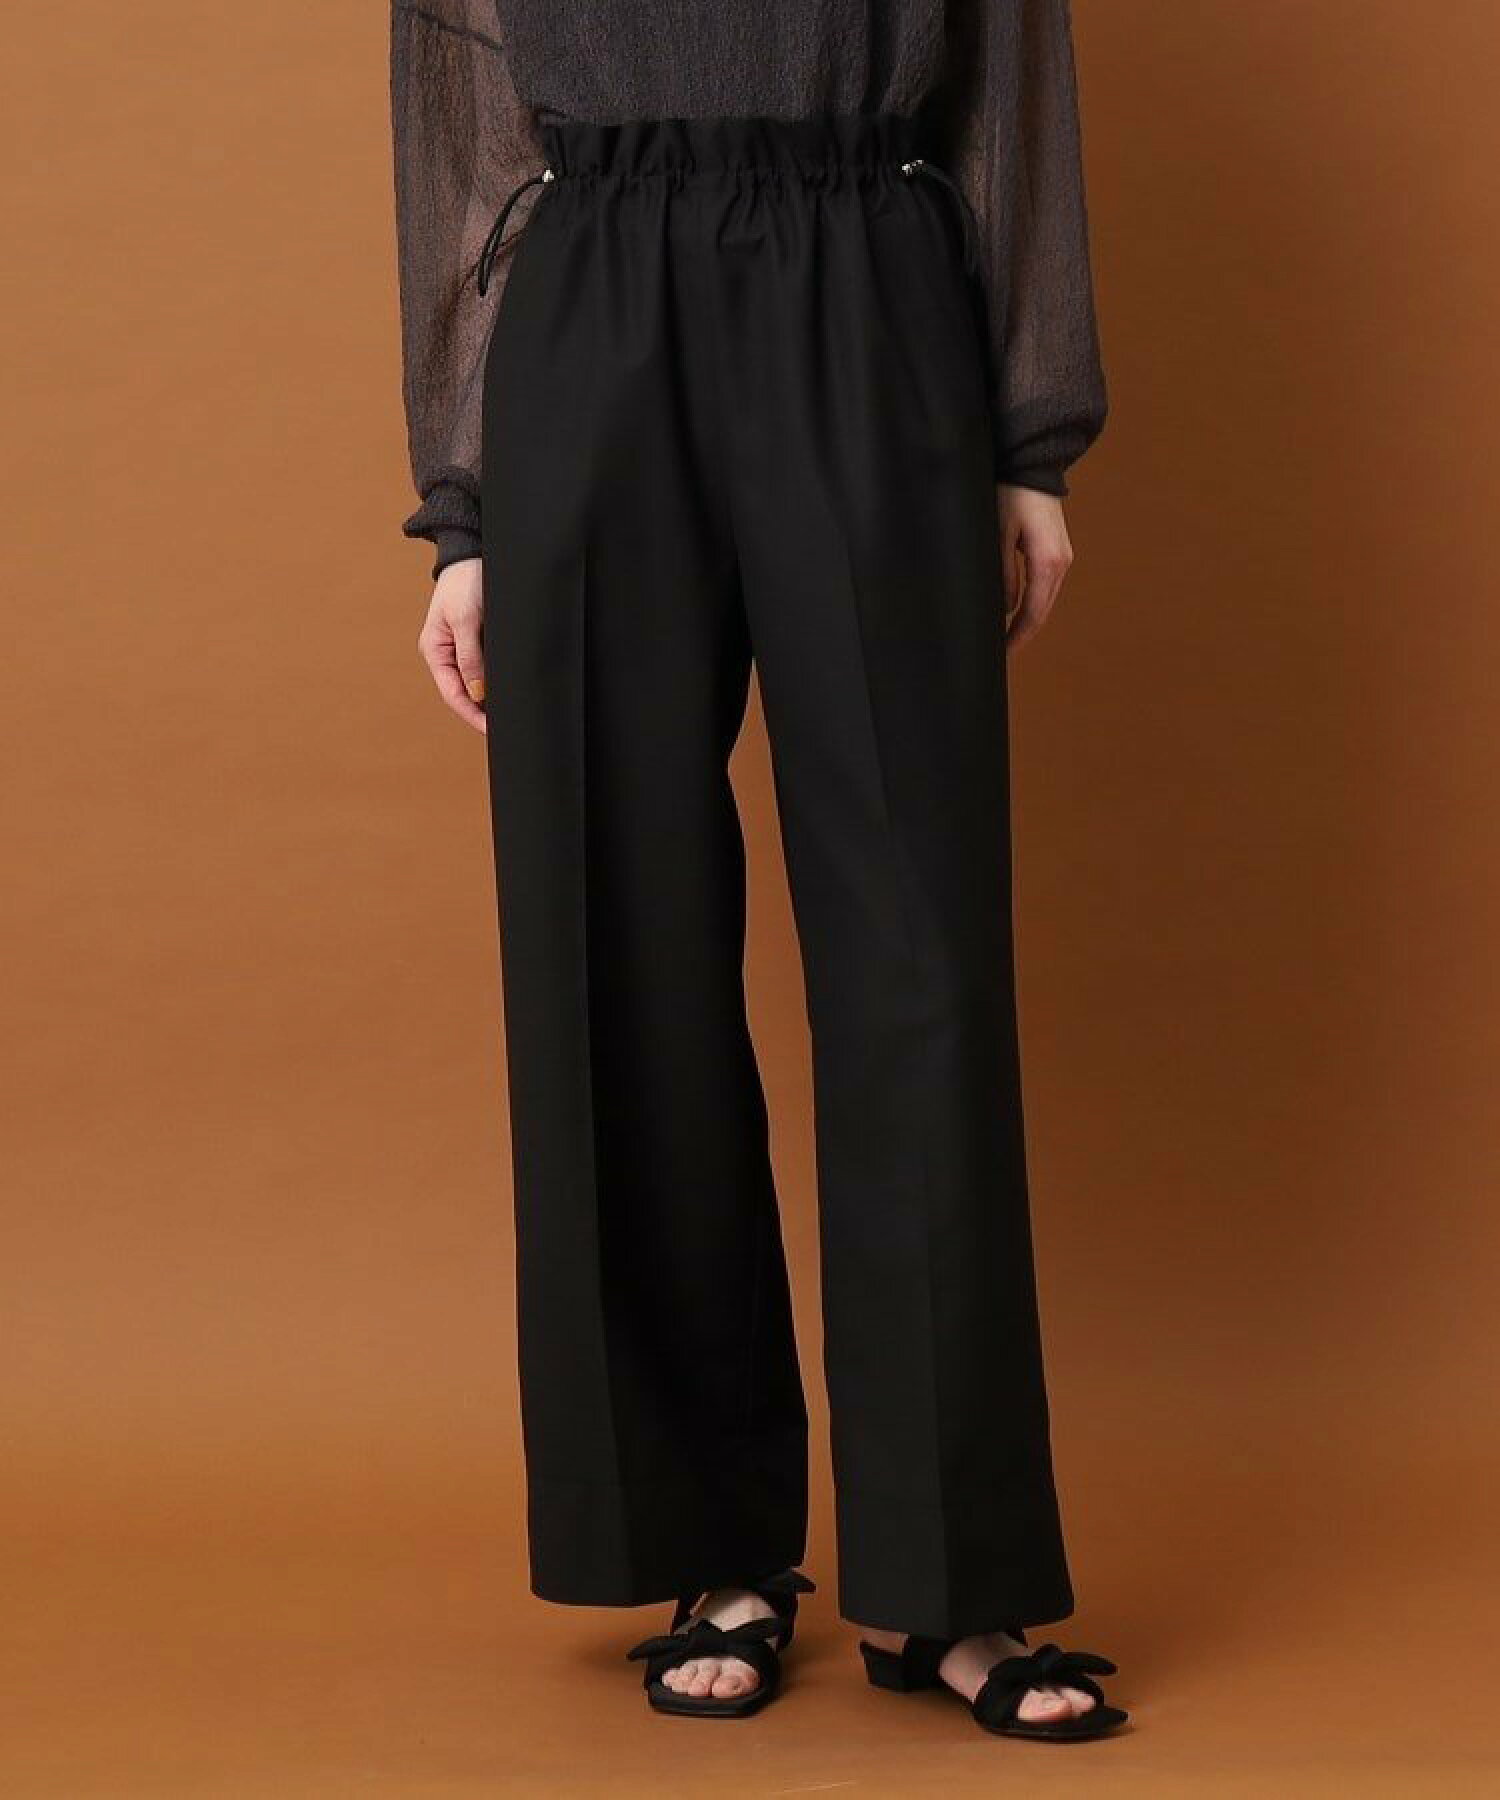 Audrey and johnwad(オードリーアンドジョンワッド)【別注】wide trousers